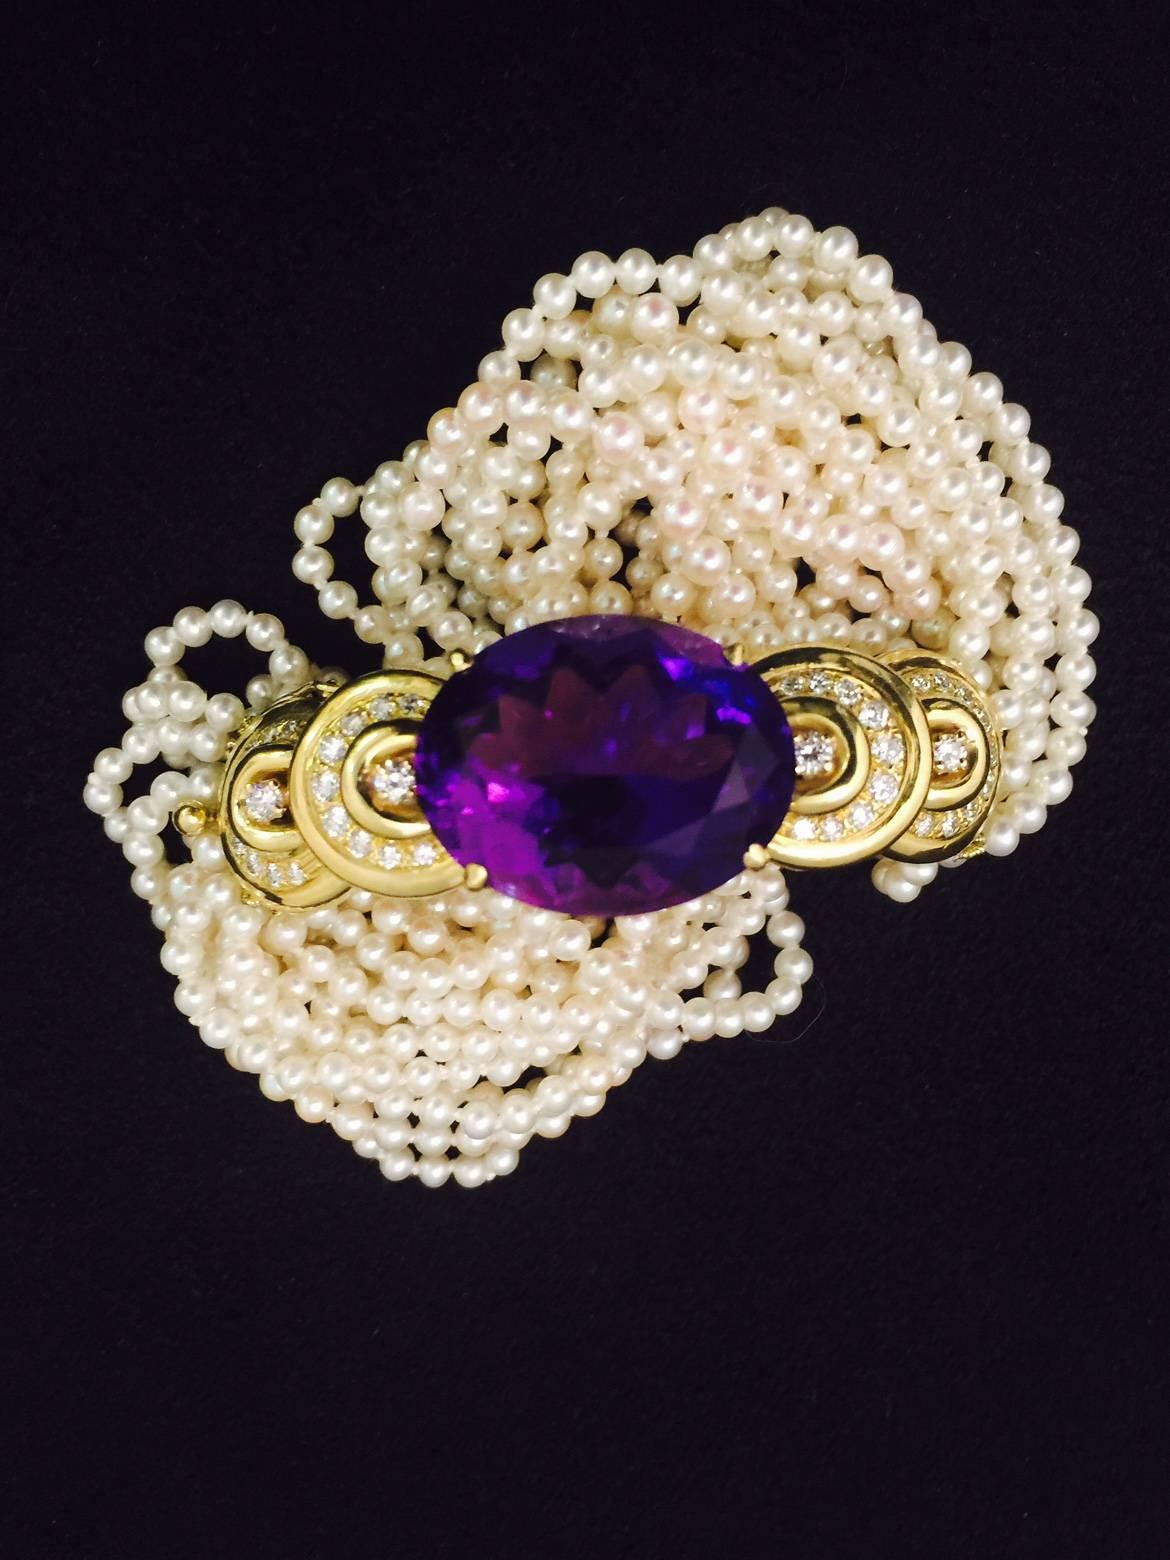 This amazing amethyst bracelet is a showstopper!  Begin with an impressive 14 rows of 3mm seed pearls.  Because these can be twisted torsade style the bracelet fits wrists from 7-7.5'.  An 18 karat yellow gold top section boasts an amethyst